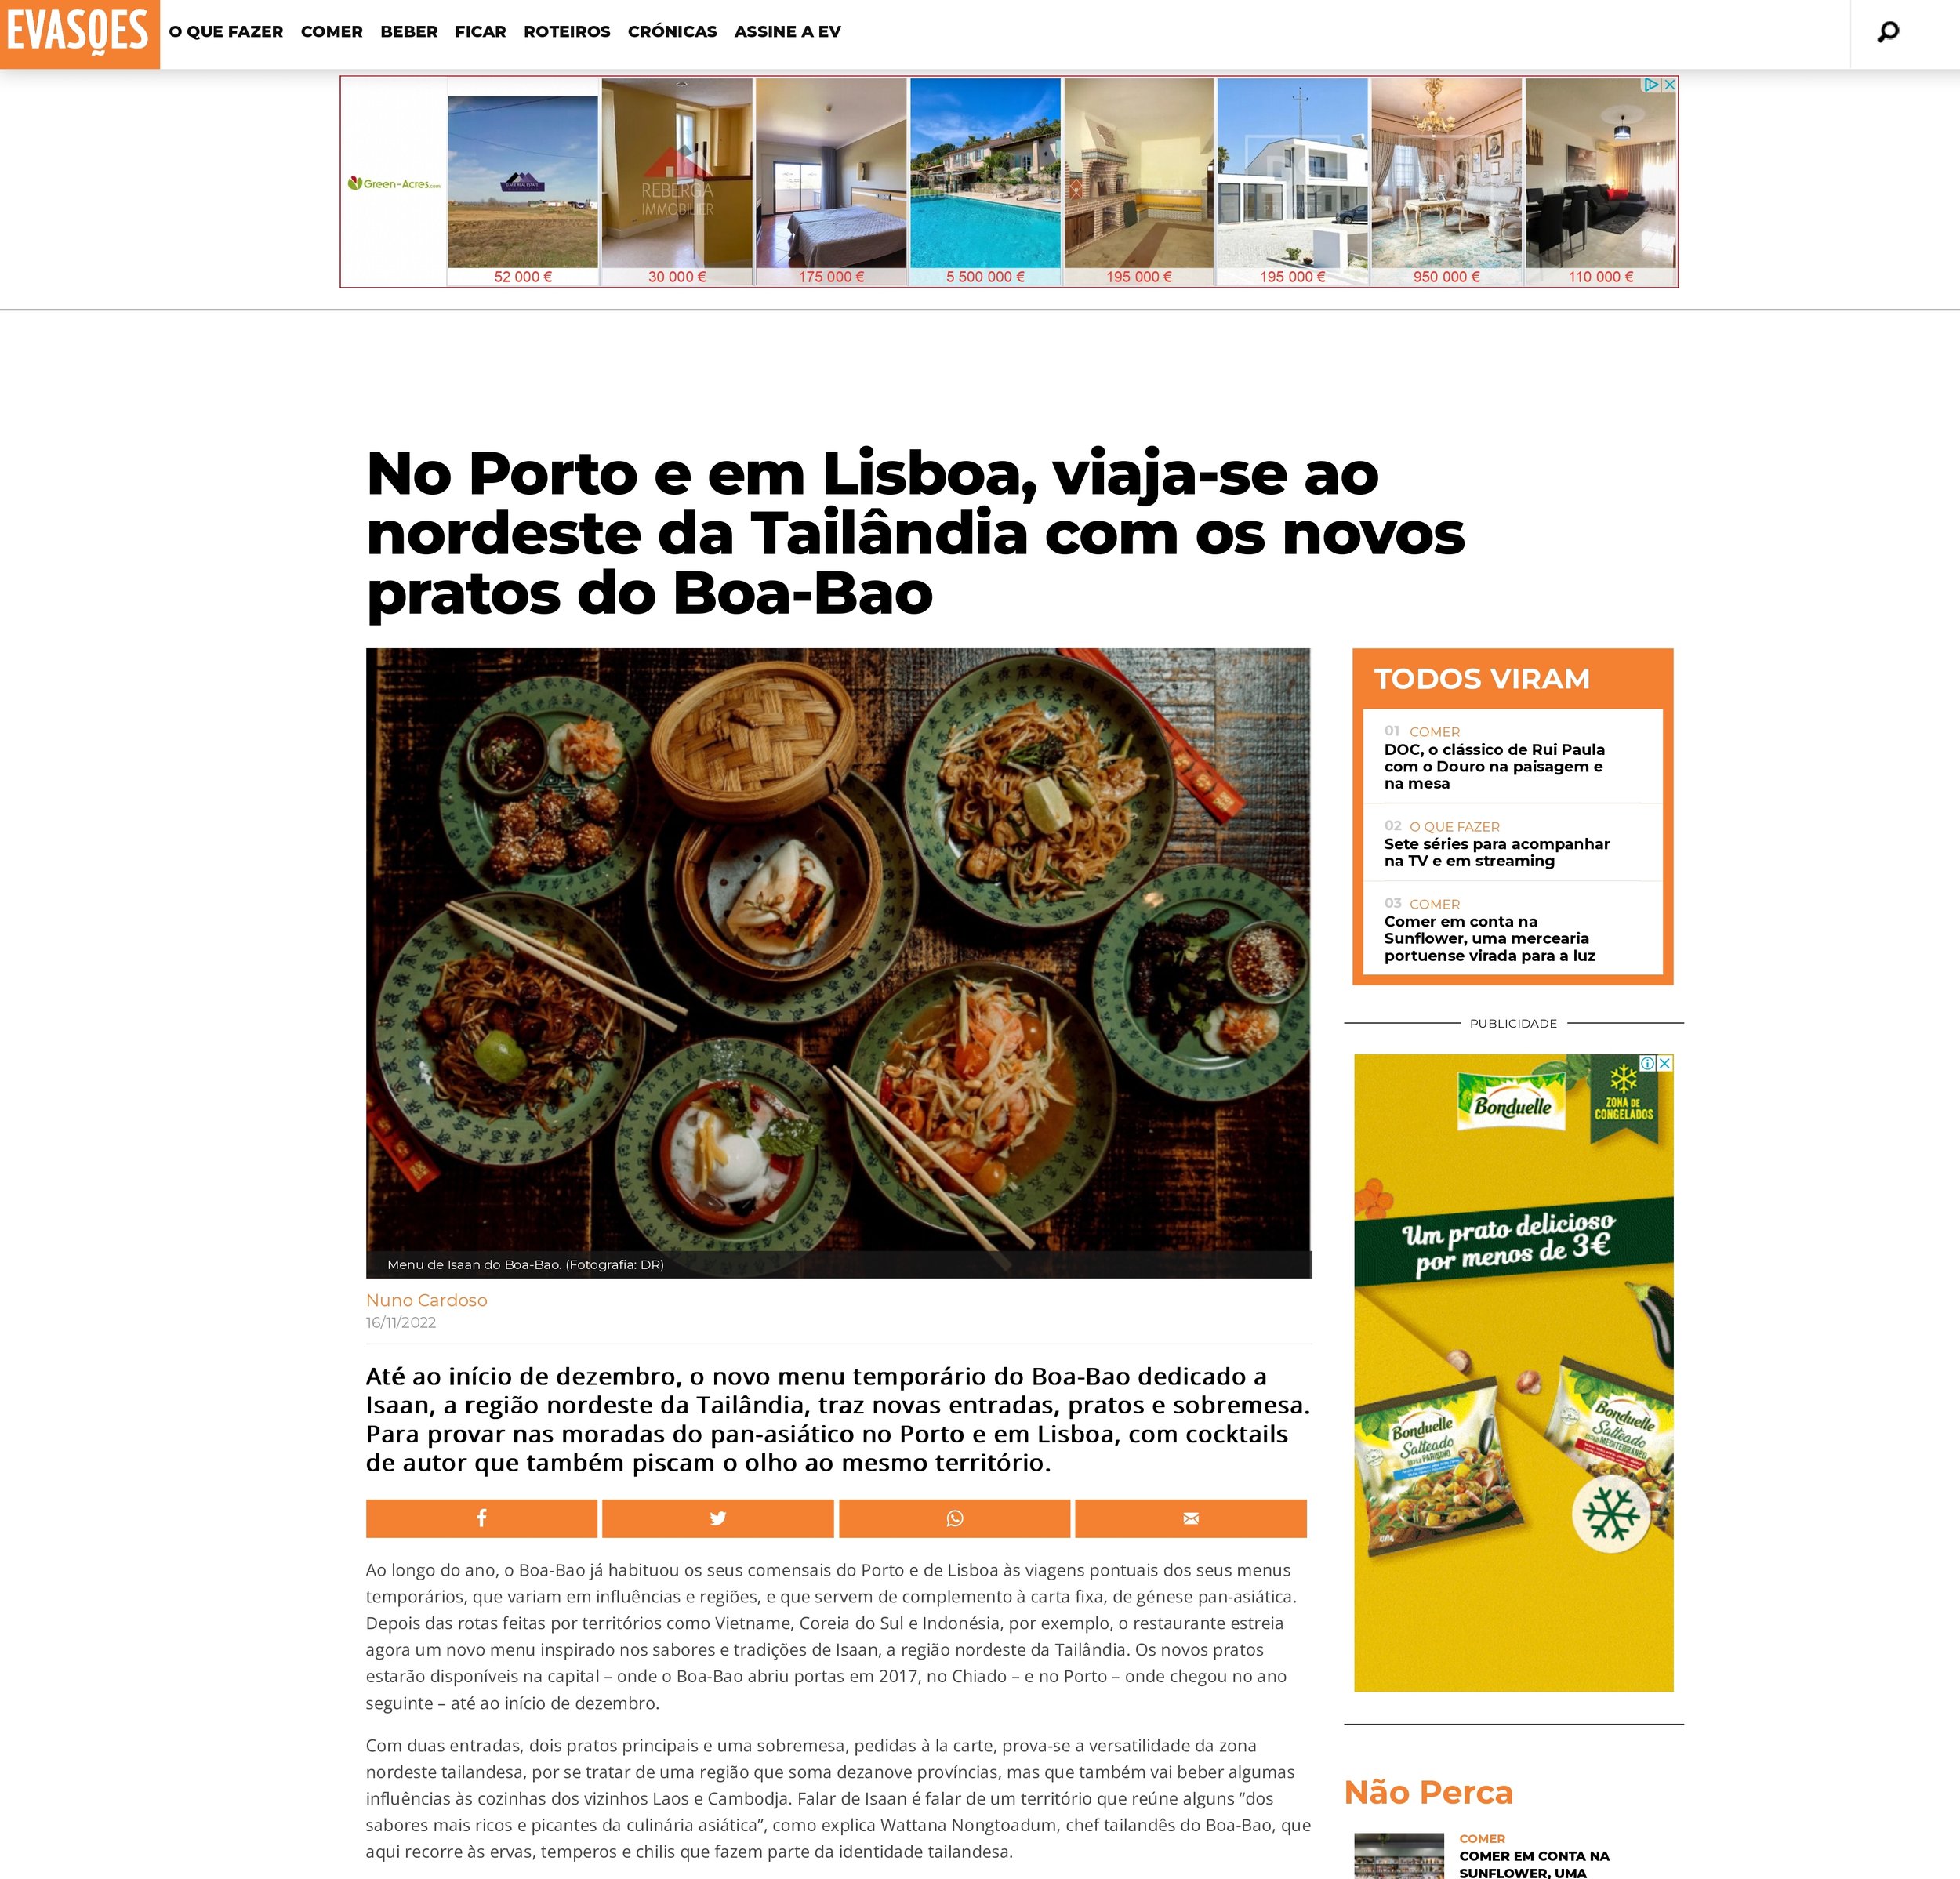 Evasões Online_In Porto and Lisbon, one travels to the northeast of Thailand with the new dishes from Boa-Bao_page-0001.jpg